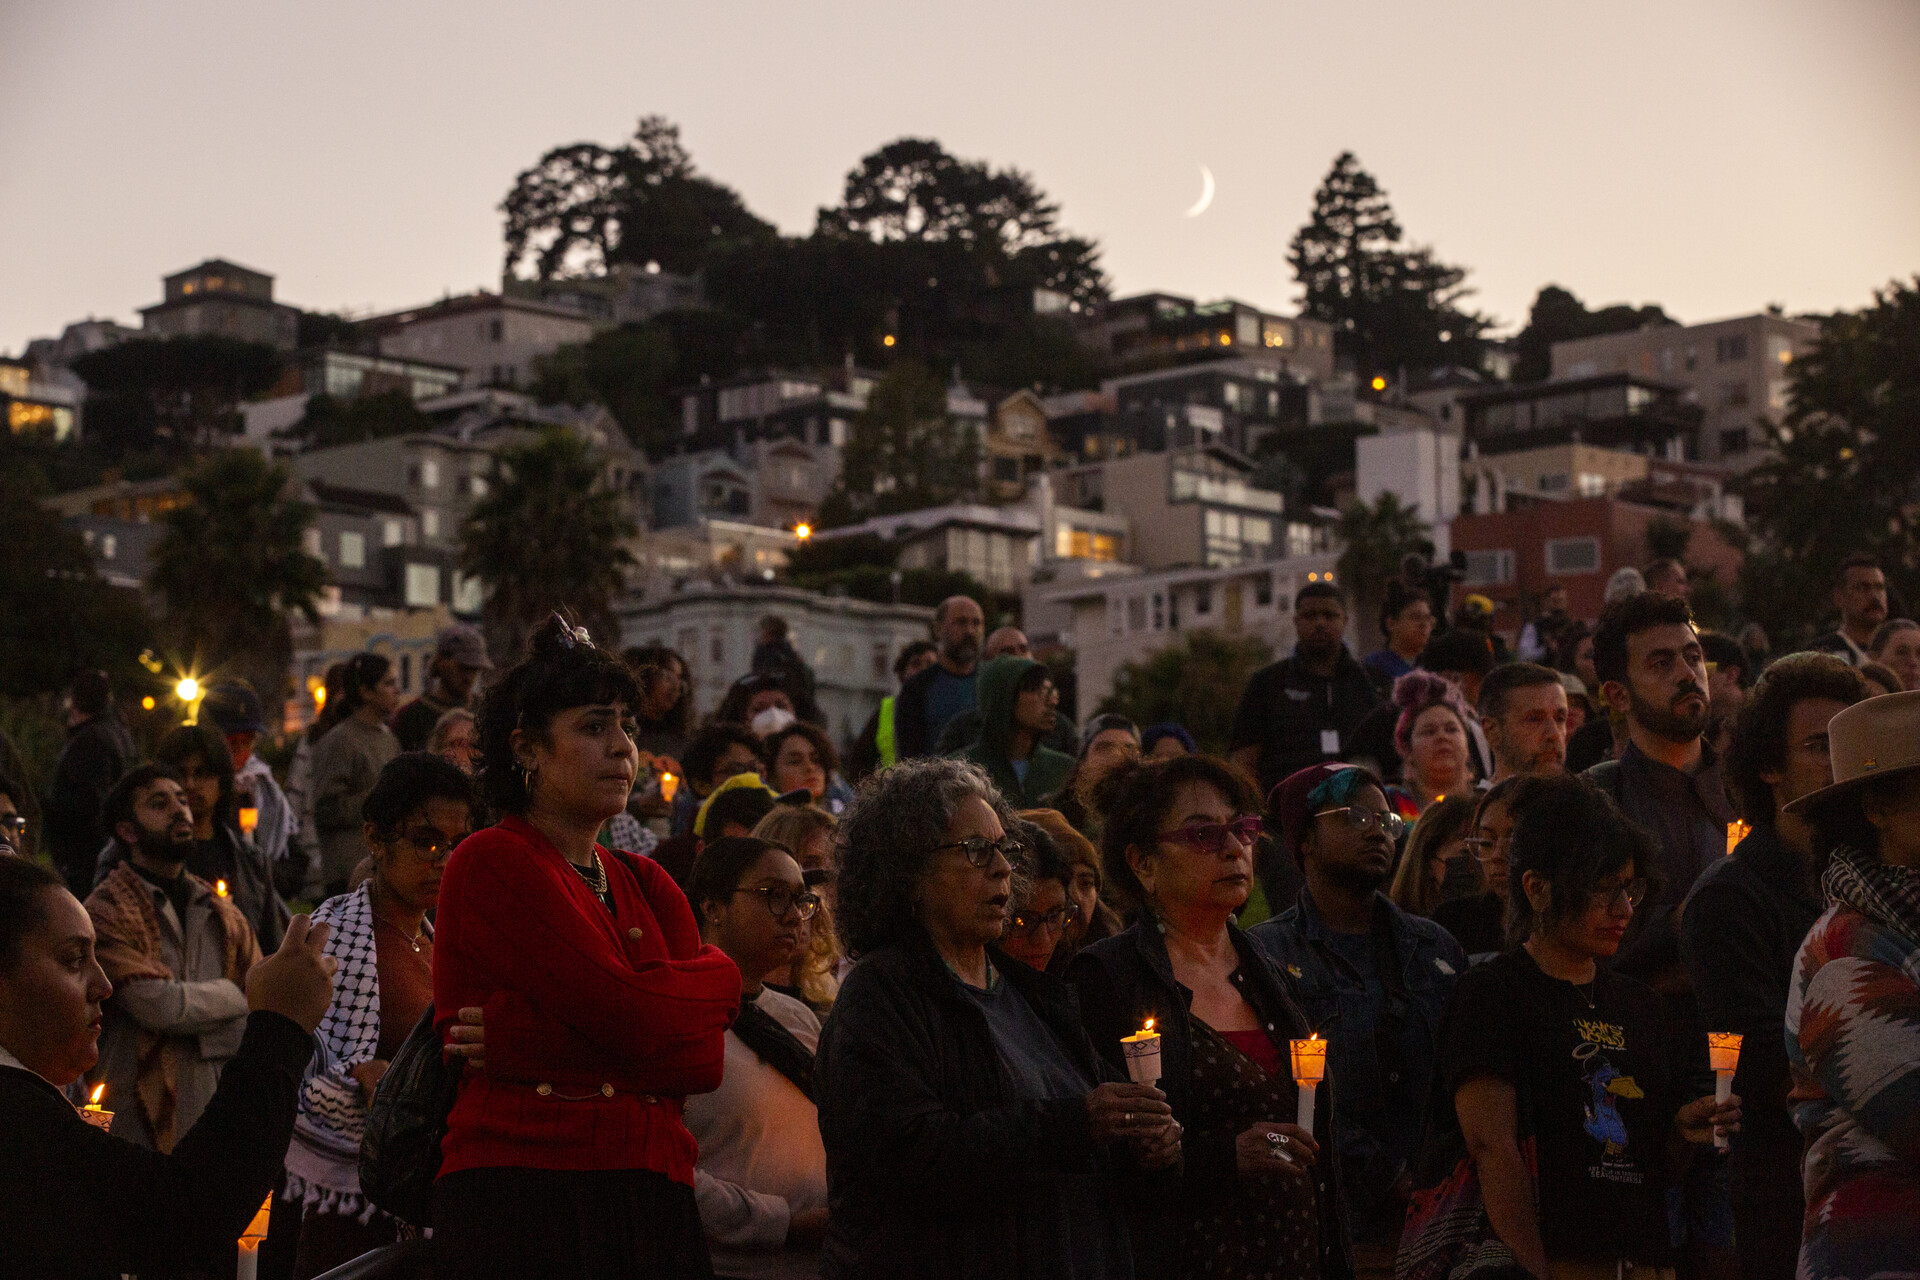 A large crowd stands in silence in a large park, and looks away from the camera. Many are holding candles. All have serious expressions.